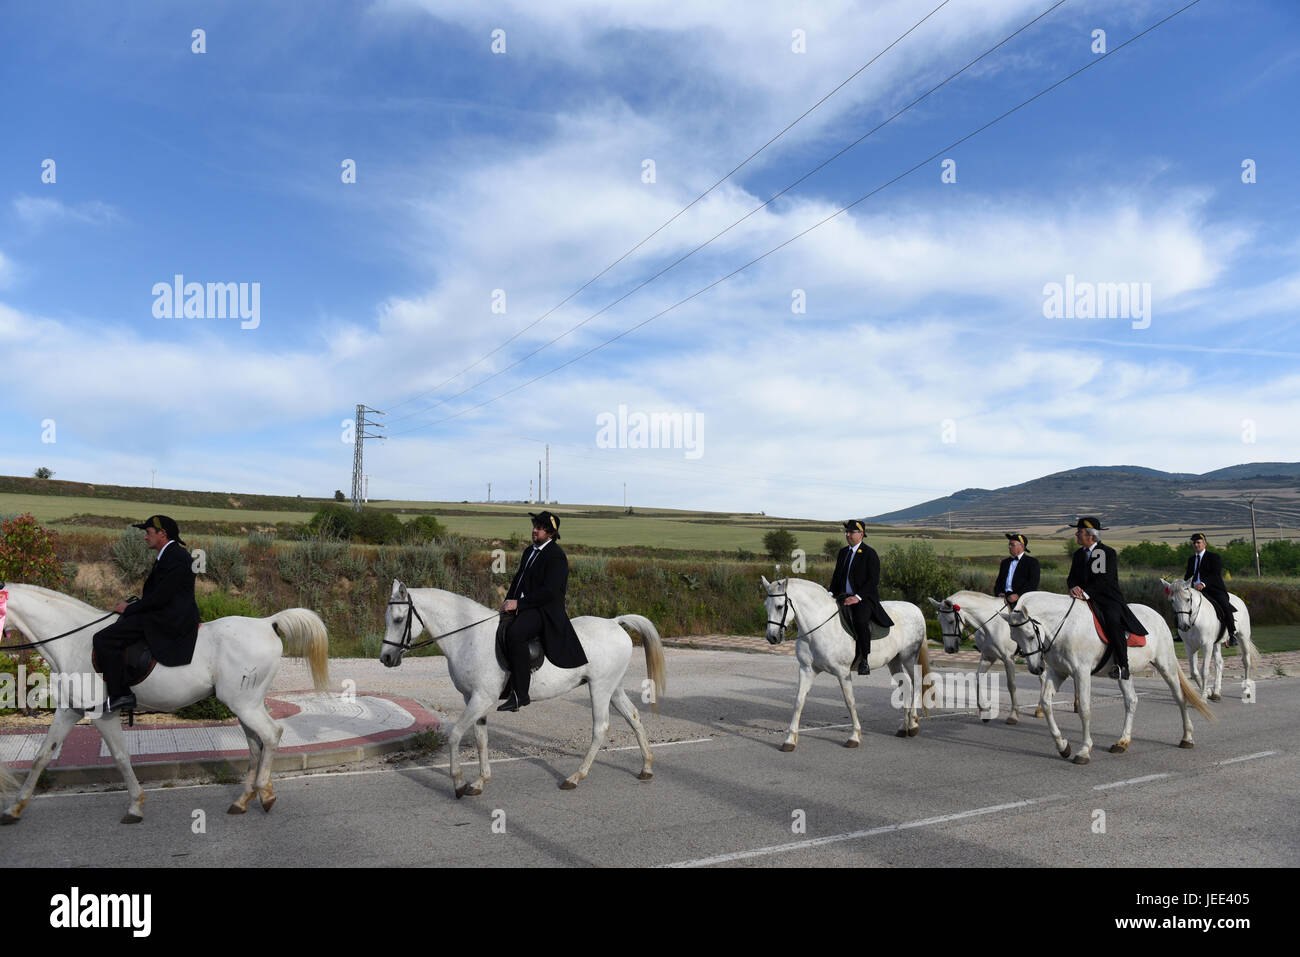 San Pedro Manrique, Spain. 24th June, 2017. A group of men, dressed in traditional costume, ride horses during the celebration of the ancient tradition of 'La Descubierta' in San Pedro Manrique, northern Spain. Credit: Jorge Sanz/Pacific Press/Alamy Live News Stock Photo